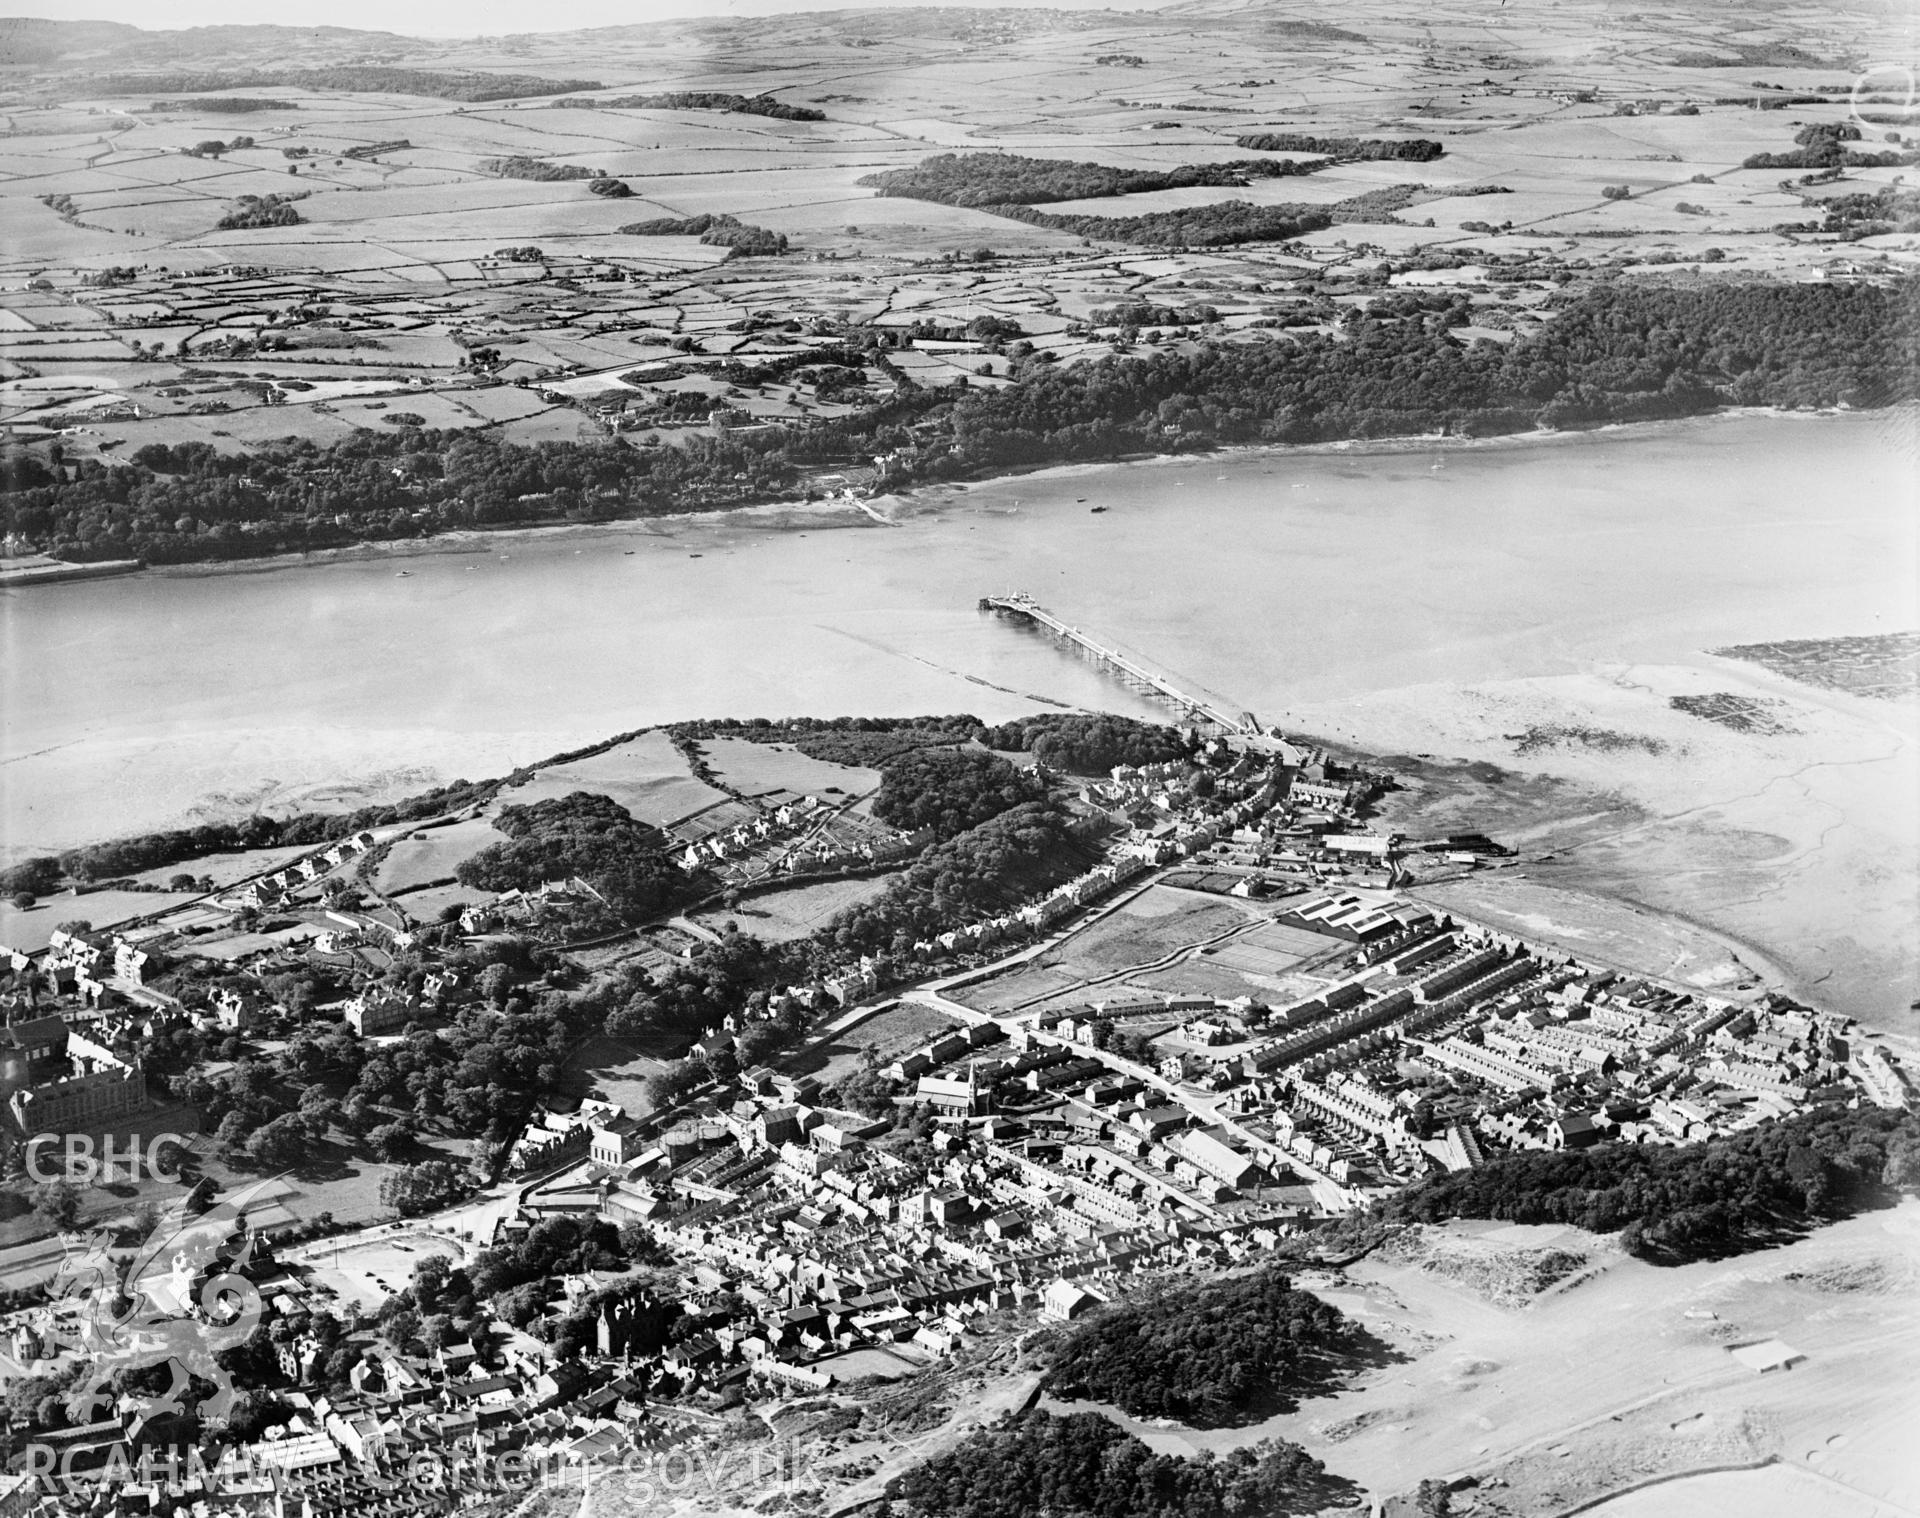 View of Bangor, oblique aerial view. 5?x4? black and white glass plate negative.